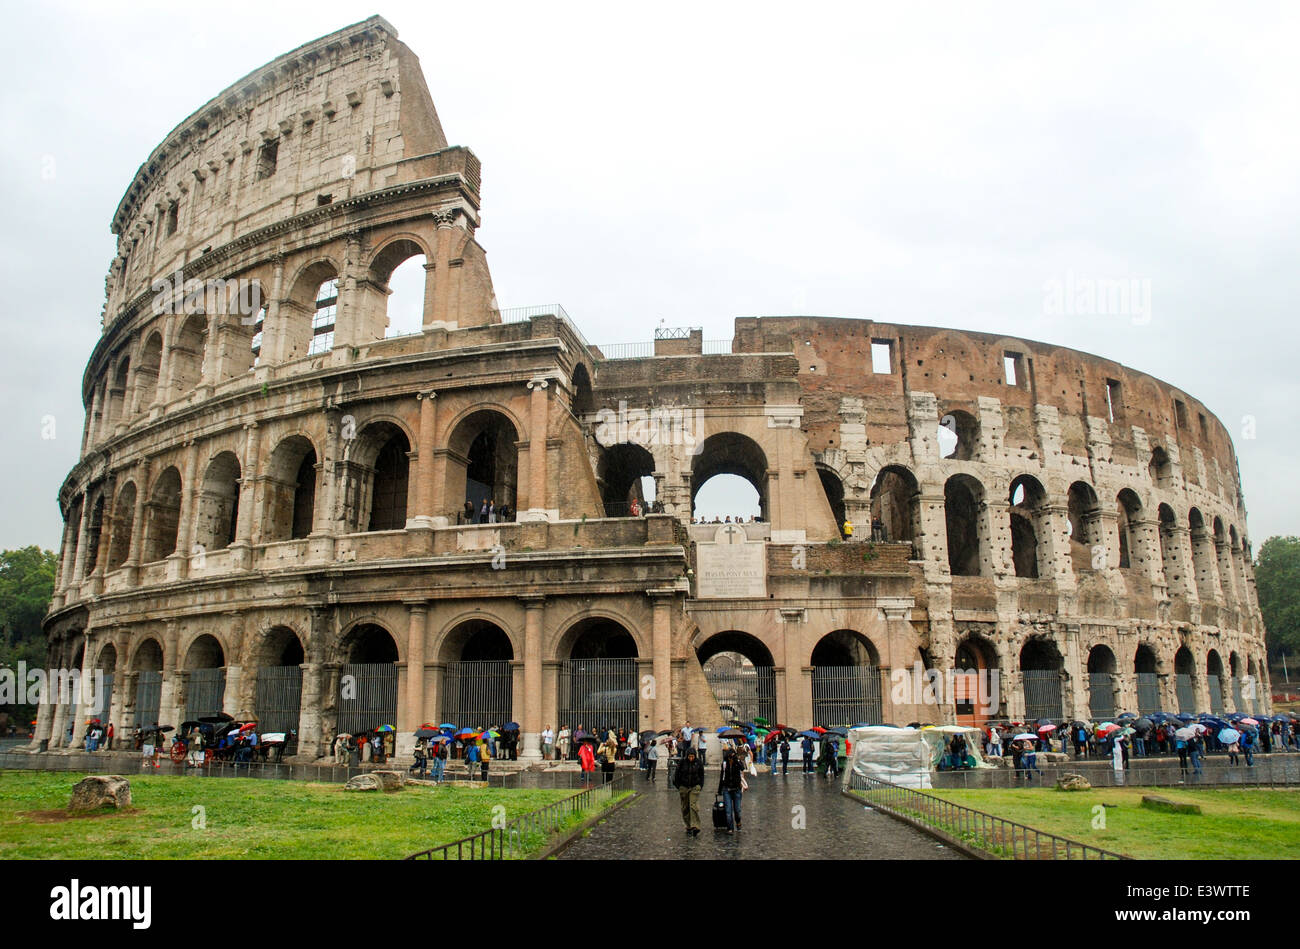 A view of the Colosseum in Rome. Stock Photo